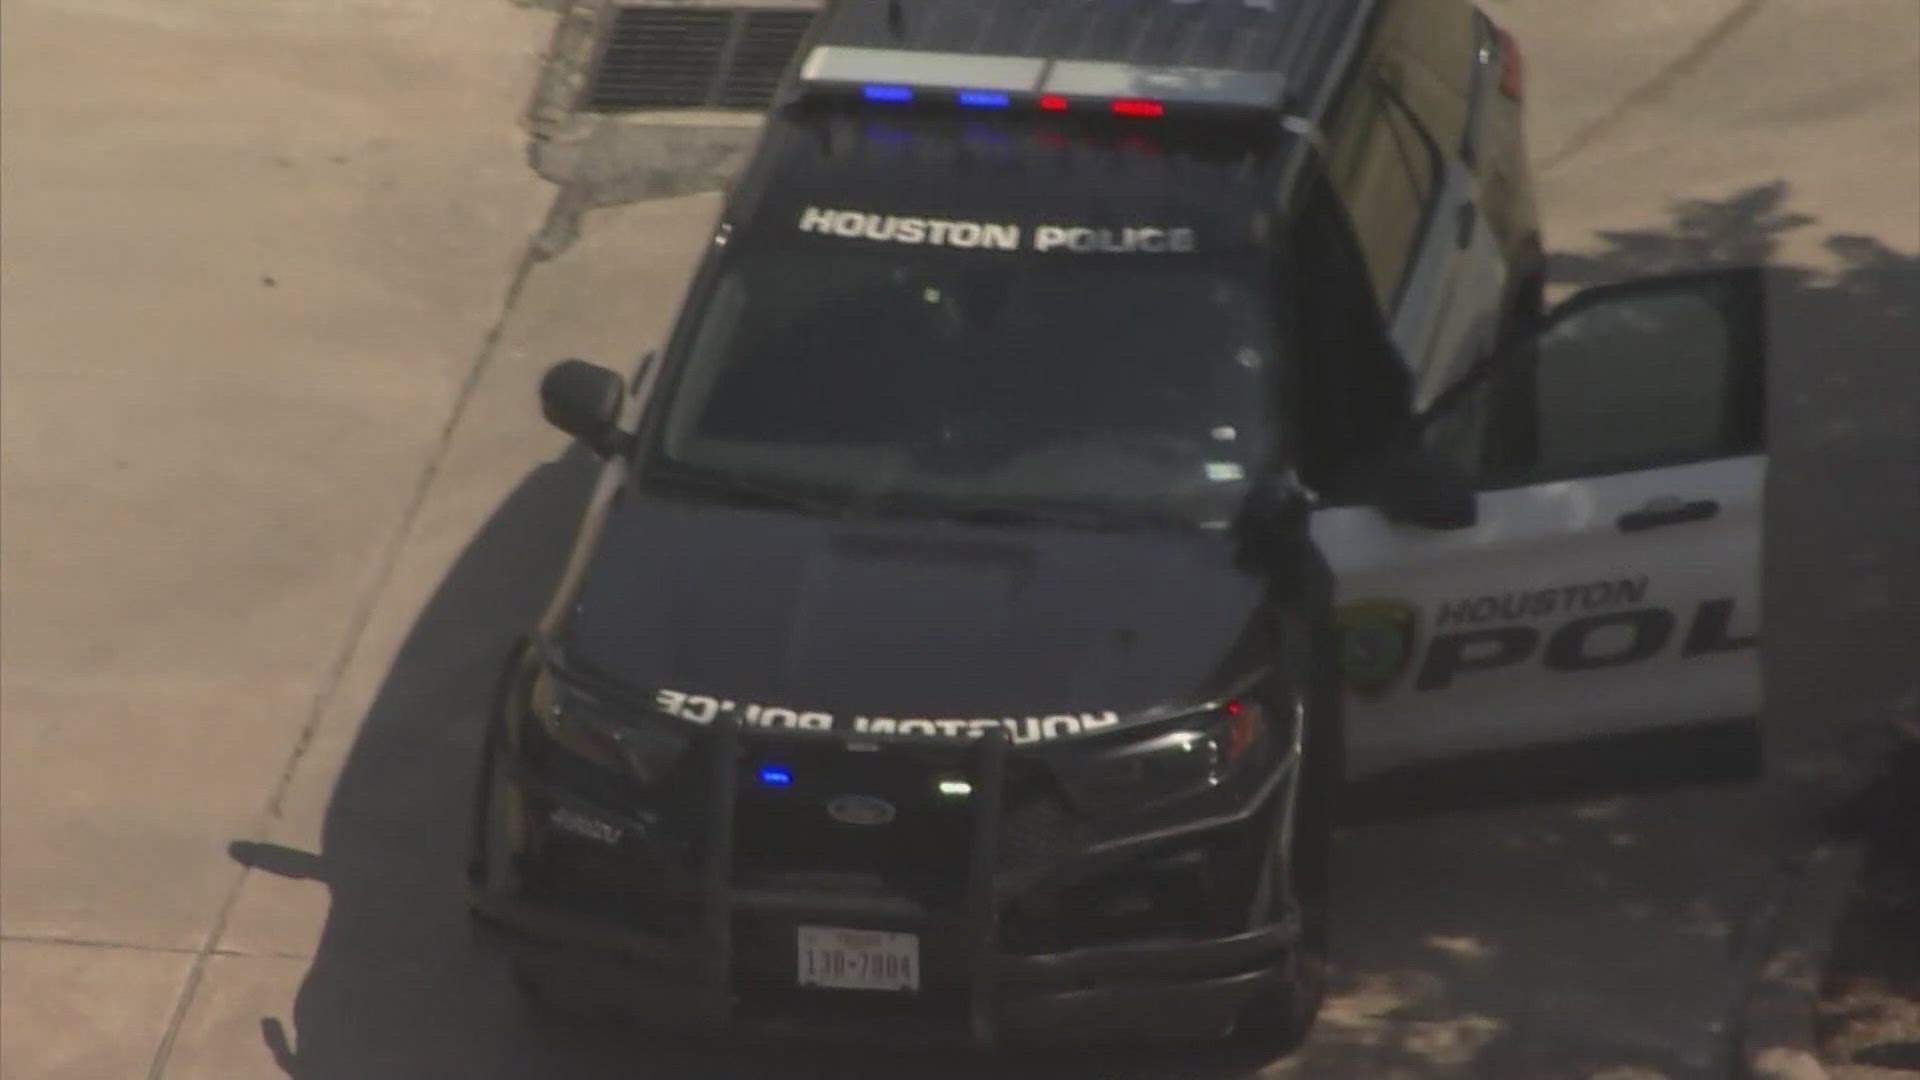 A woman was dropped off at a west Houston urgent care after she was accidentally shot by a friend, police said. A man was questioned.